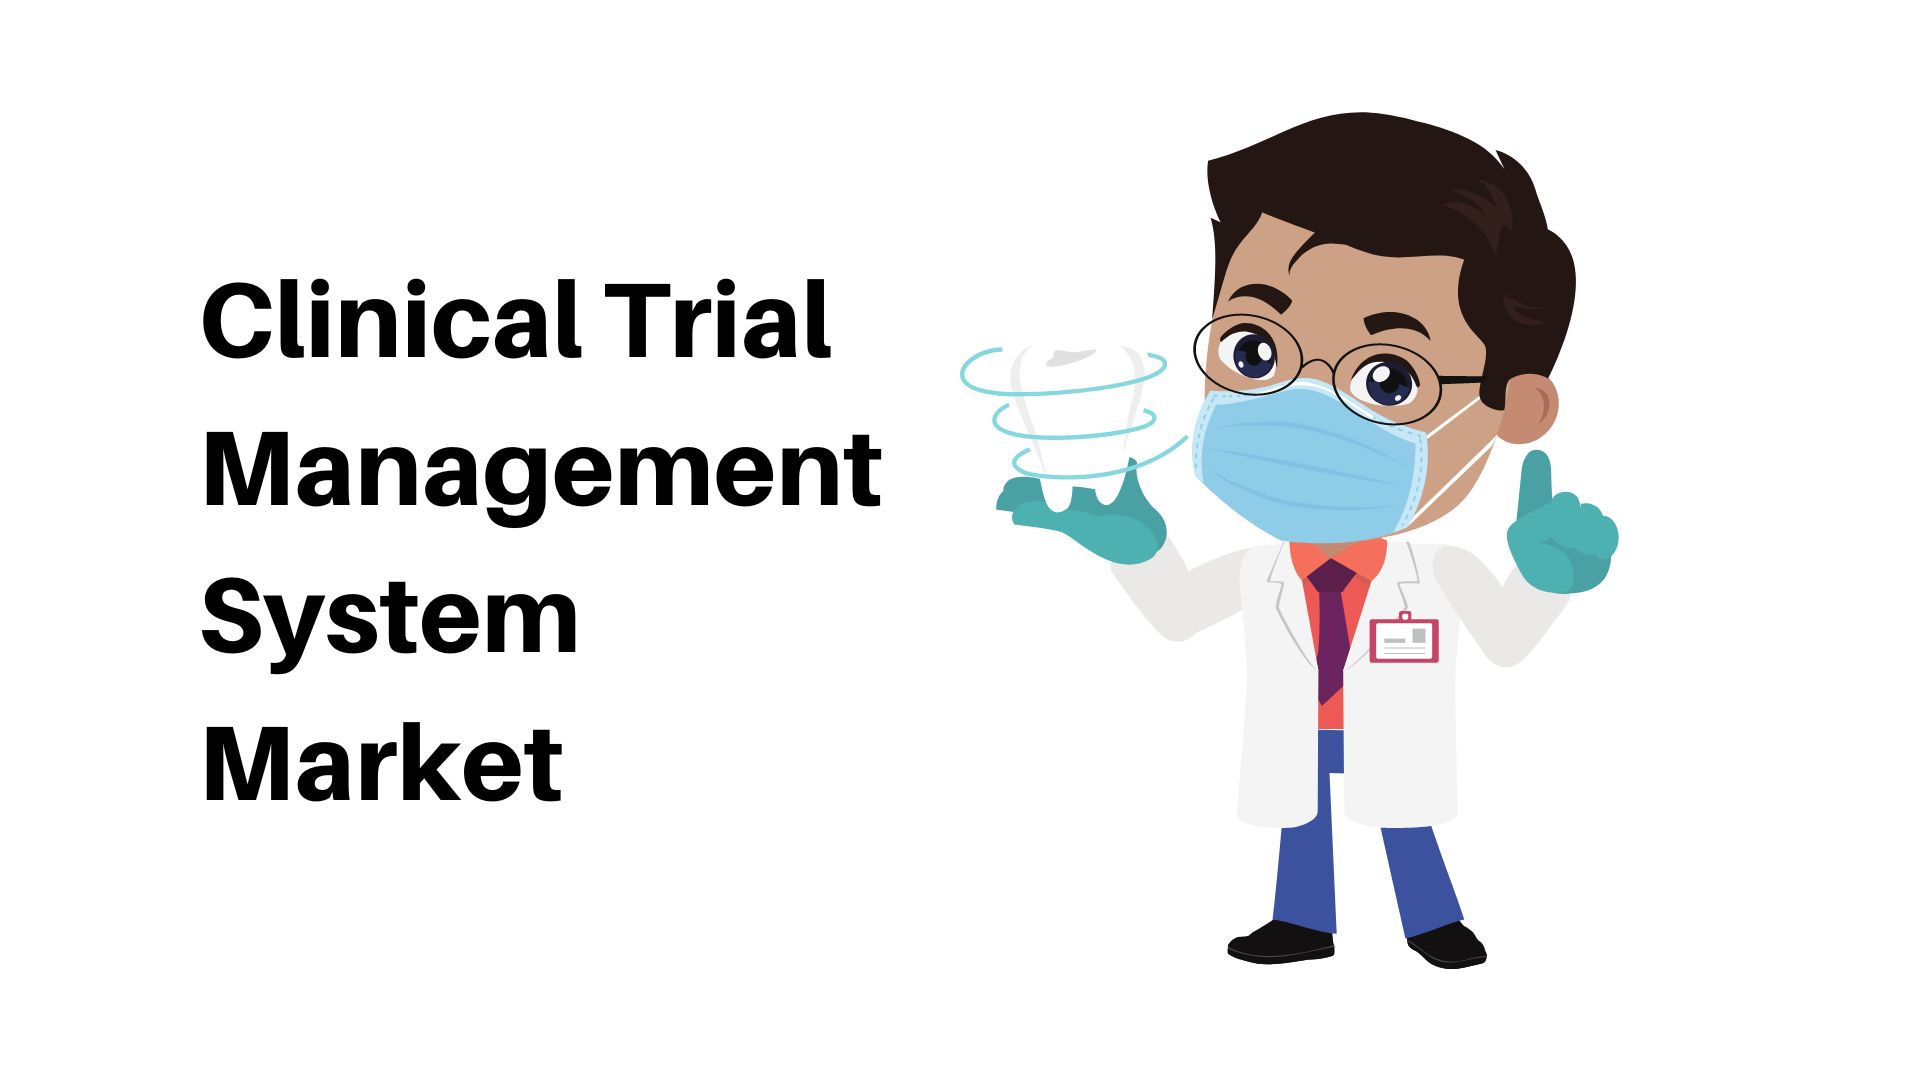 Clinical Trial Management System Market Hit USD 4.37 Bn | CAGR 10.3%